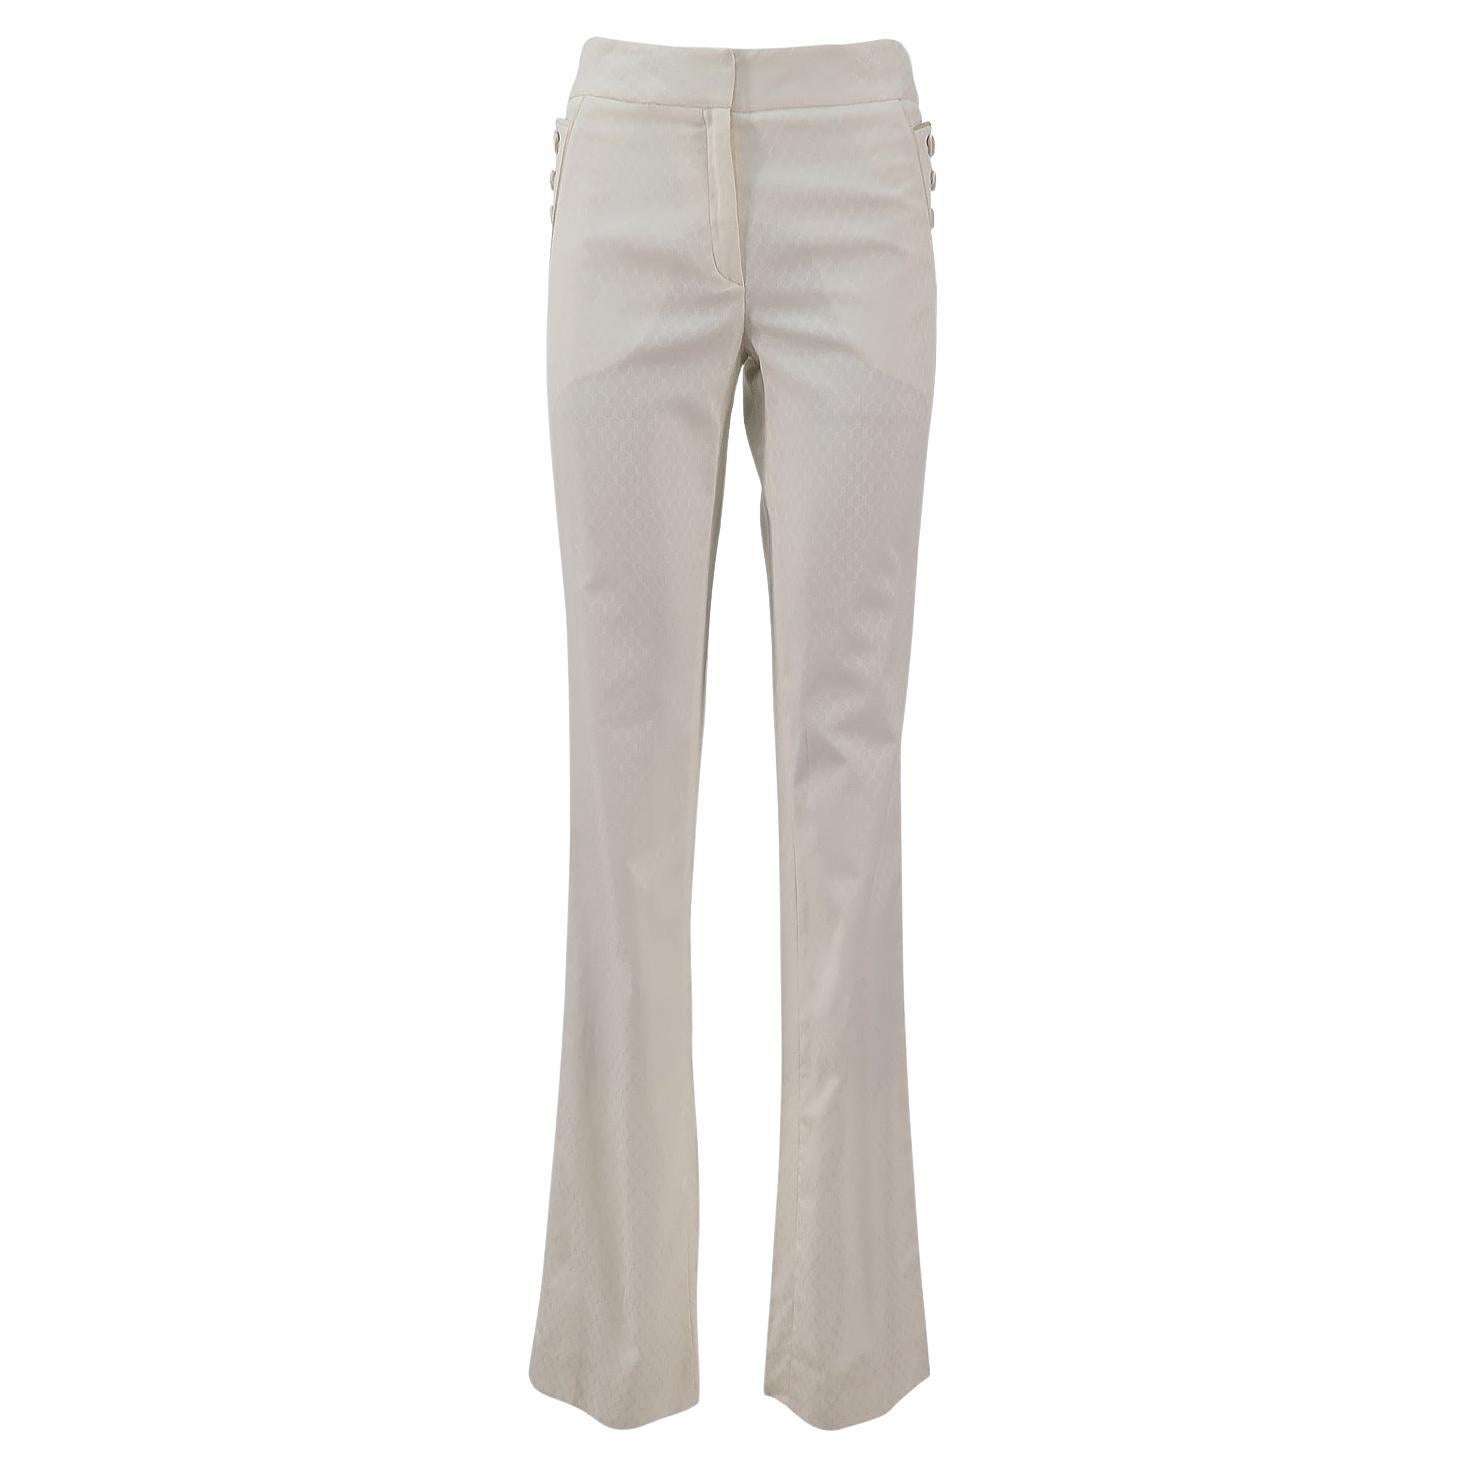 John Galliano SS-2005 Cotton and Silk Officer Pants with Contrast Piping For Sale